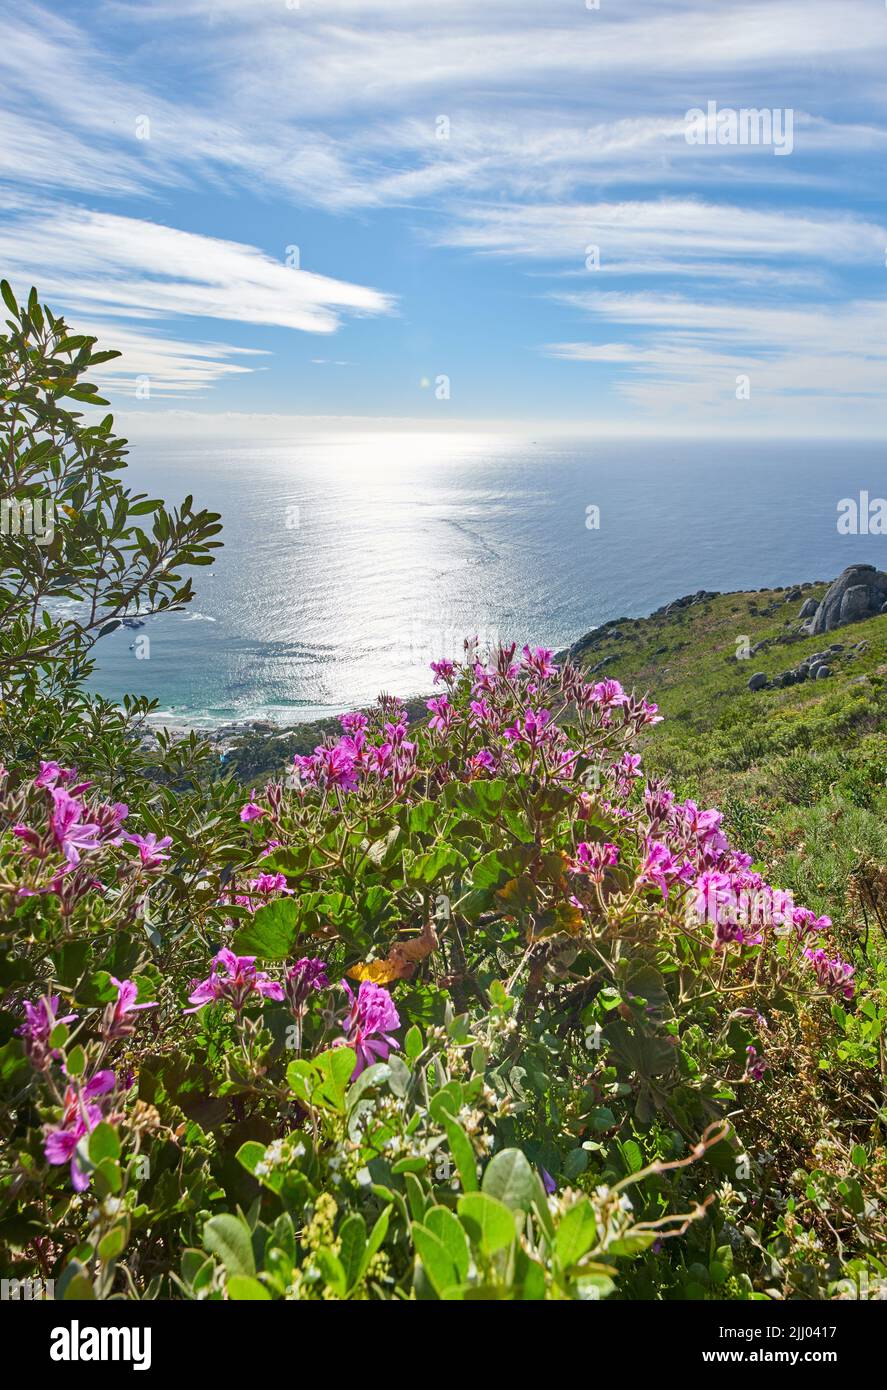 Pink ivy geranium flowers growing in their natural habitat with the ocean in the background. Lush landscape of pelargonium plants in a peaceful and Stock Photo